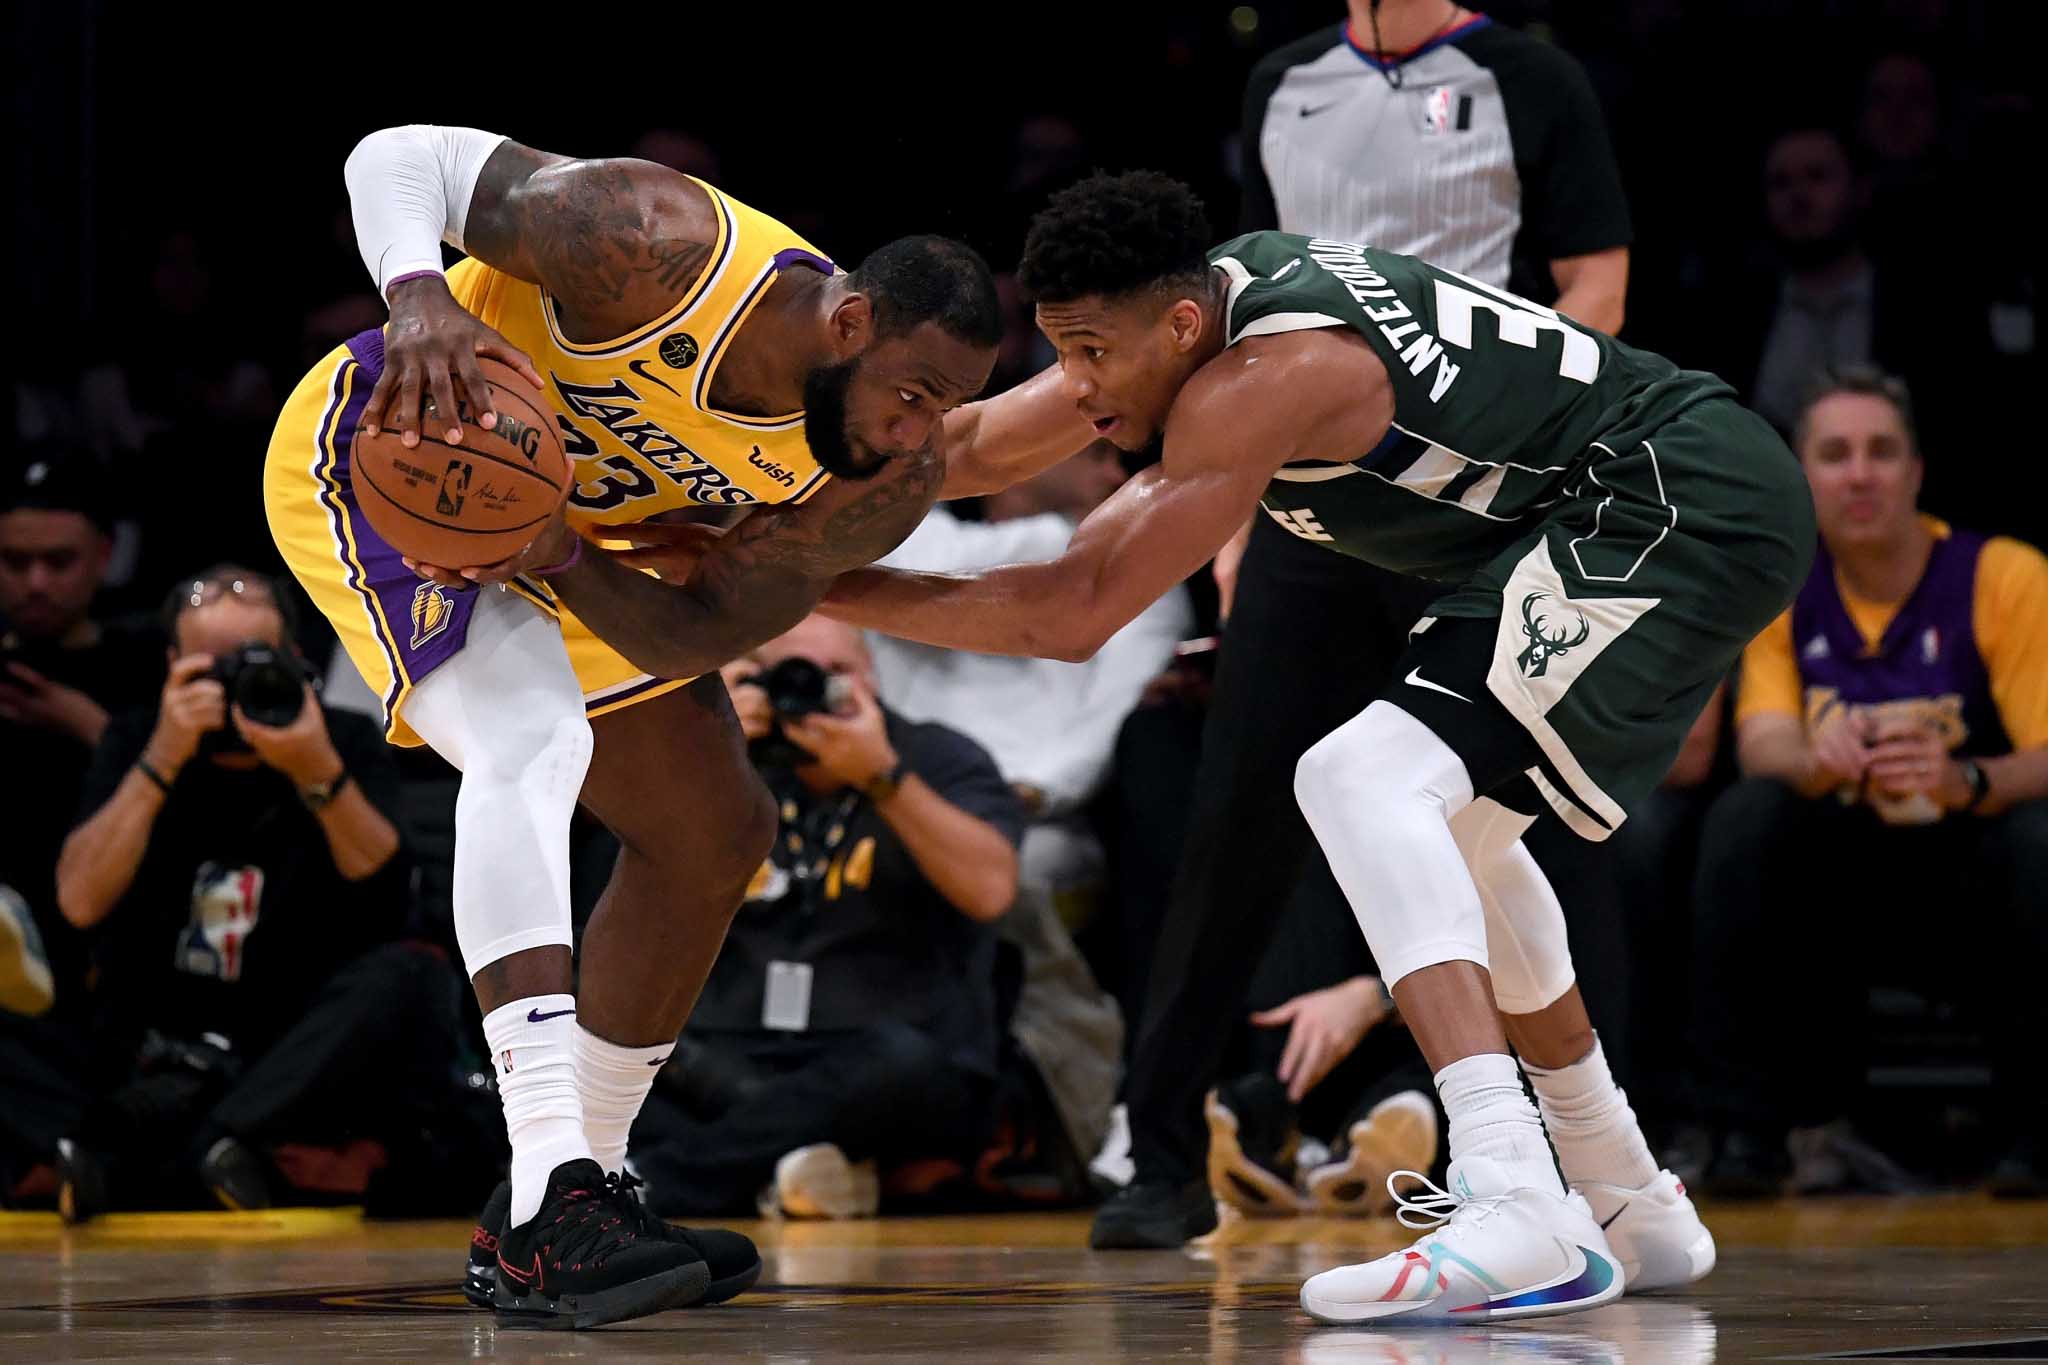 LeBron James is guarded by Giannis Antetokounmpo during the third quarter at Staples Center on March 06, 2020